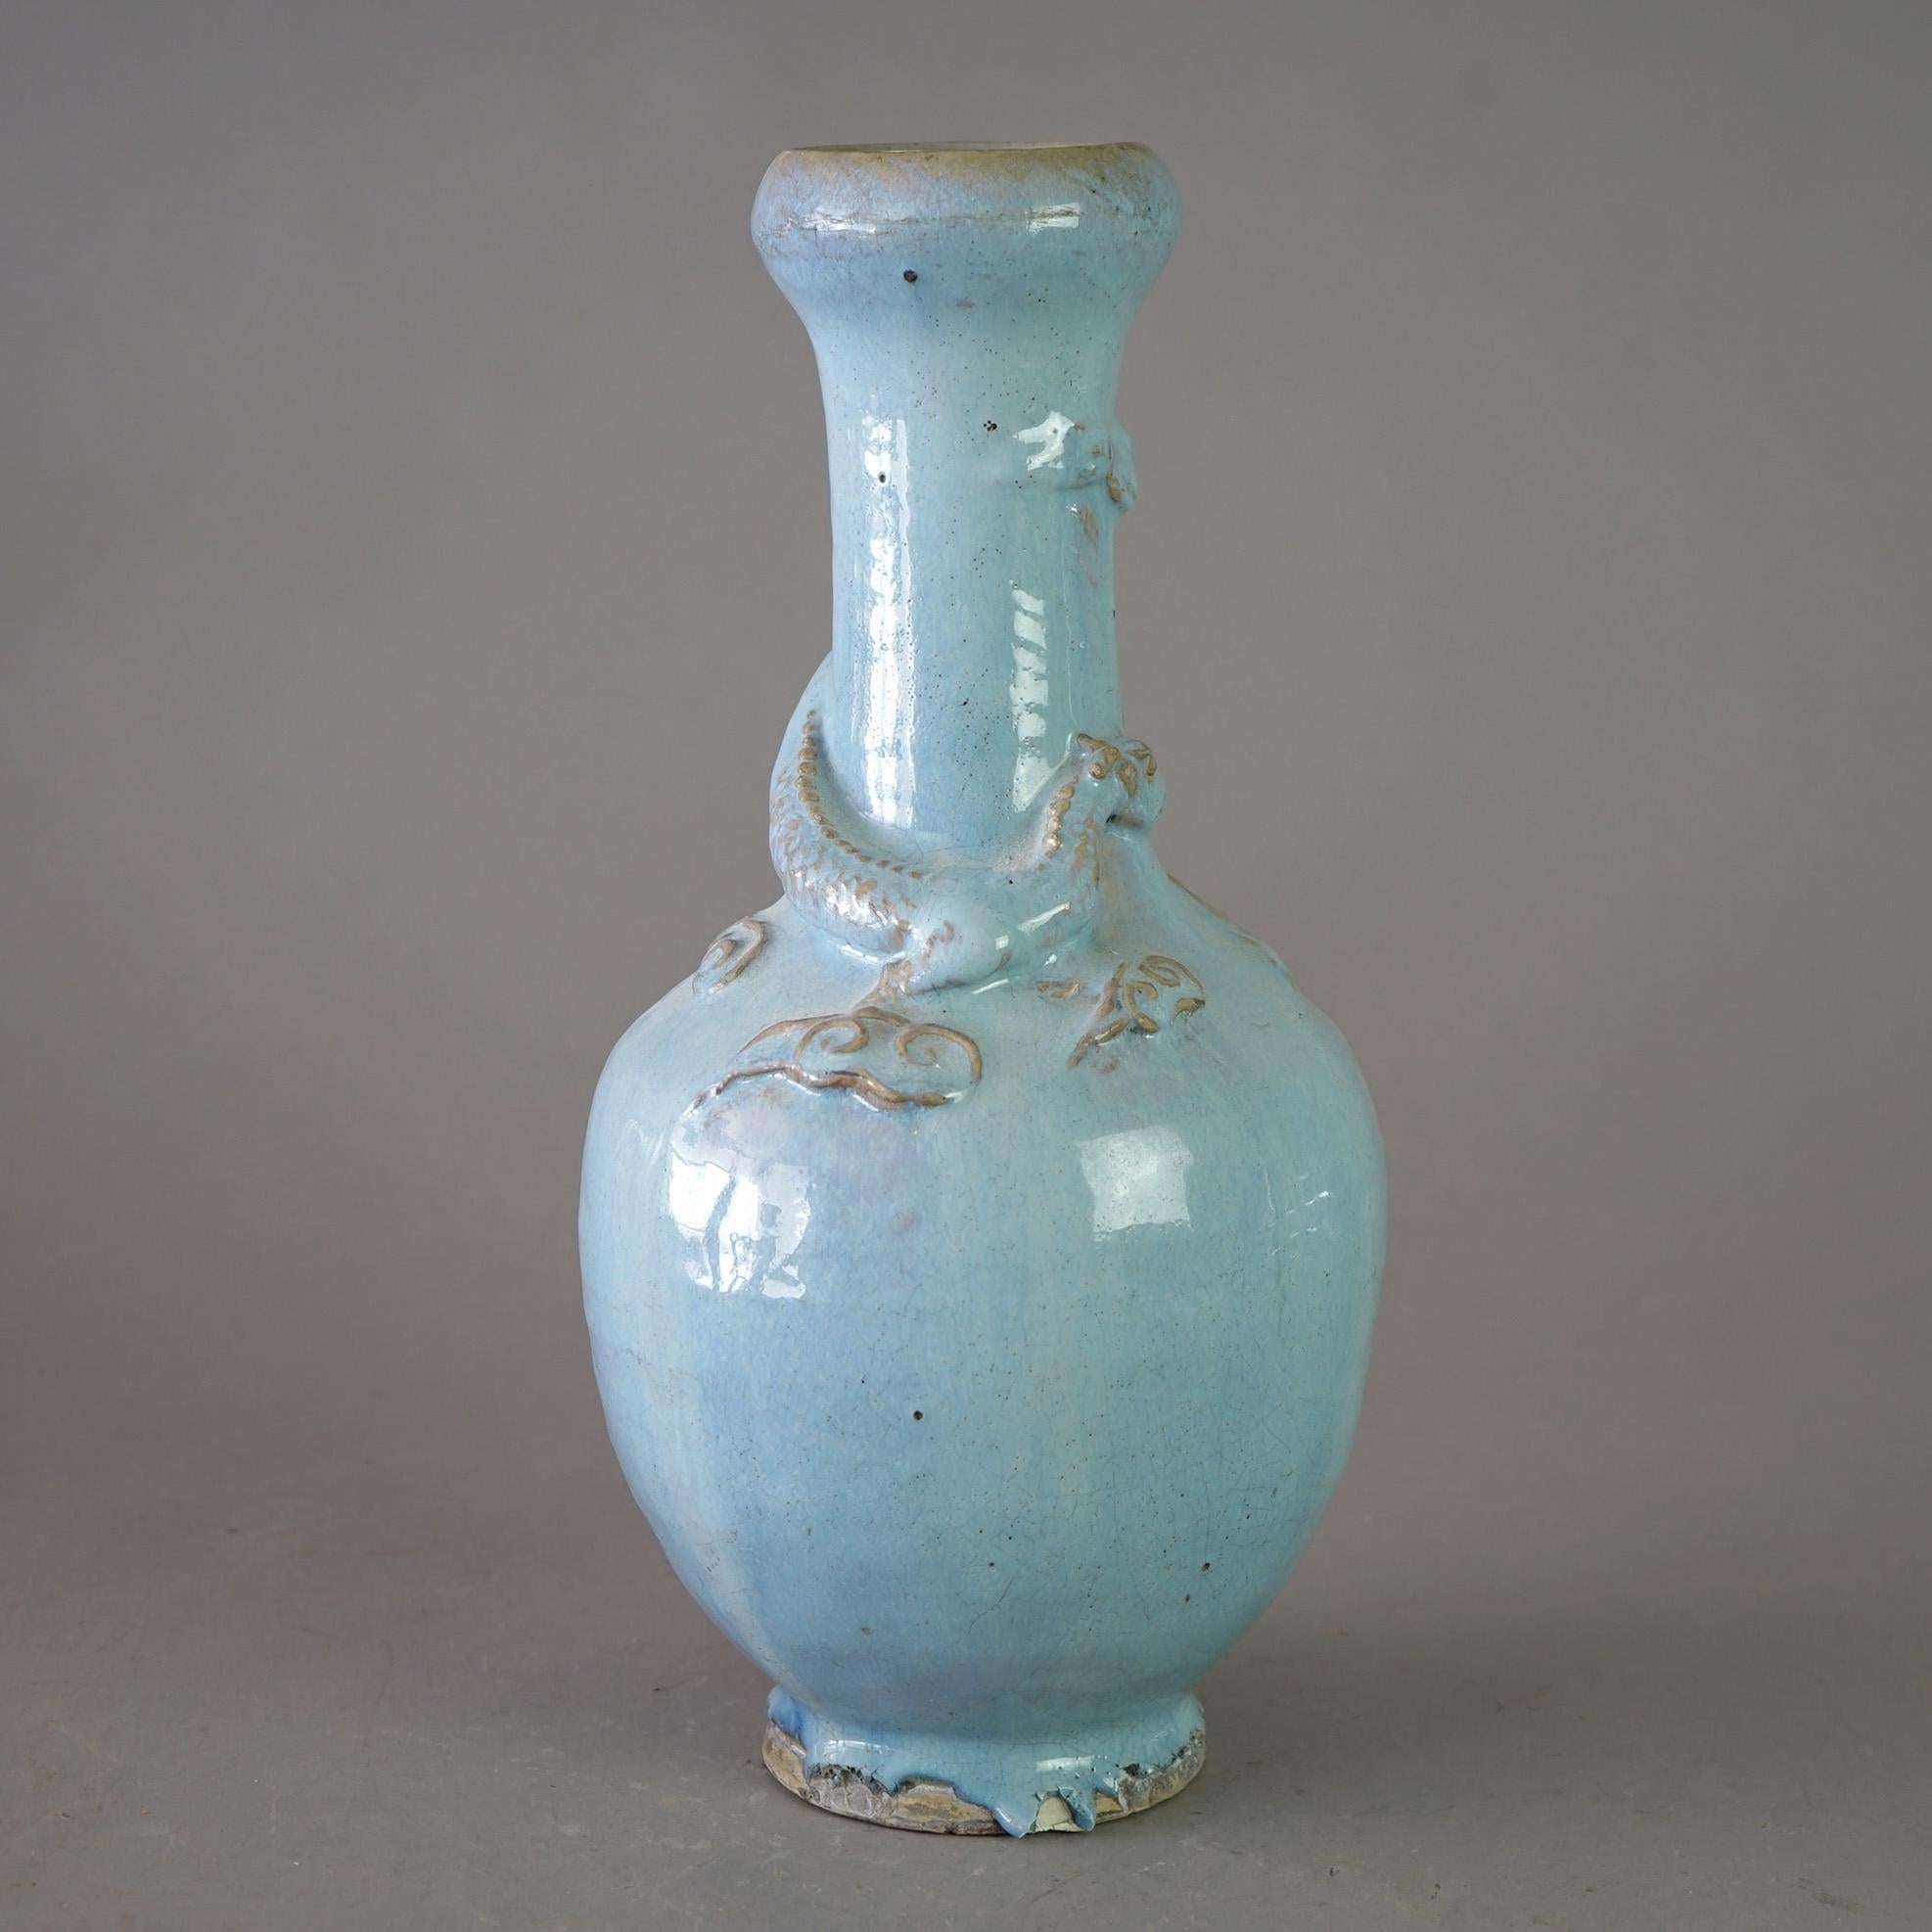 An antique figural Chinese vase offers art pottery construction with applied dragon, c1920

Measures - 15